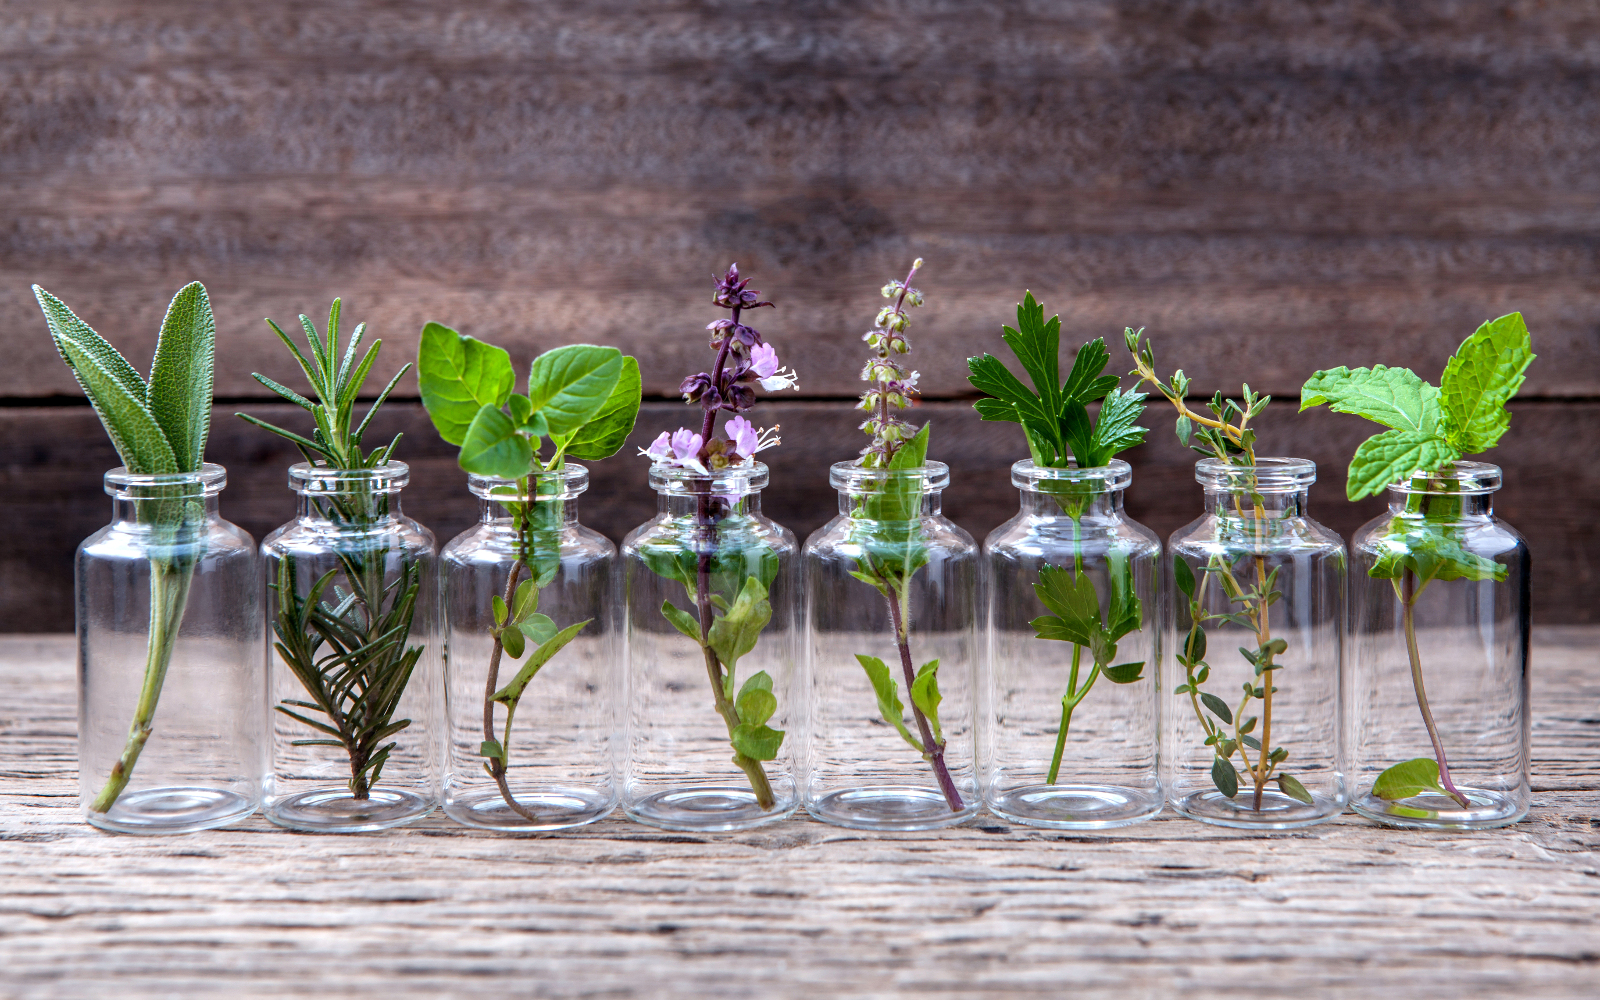 Small glass jars each with a sprig of a different herb